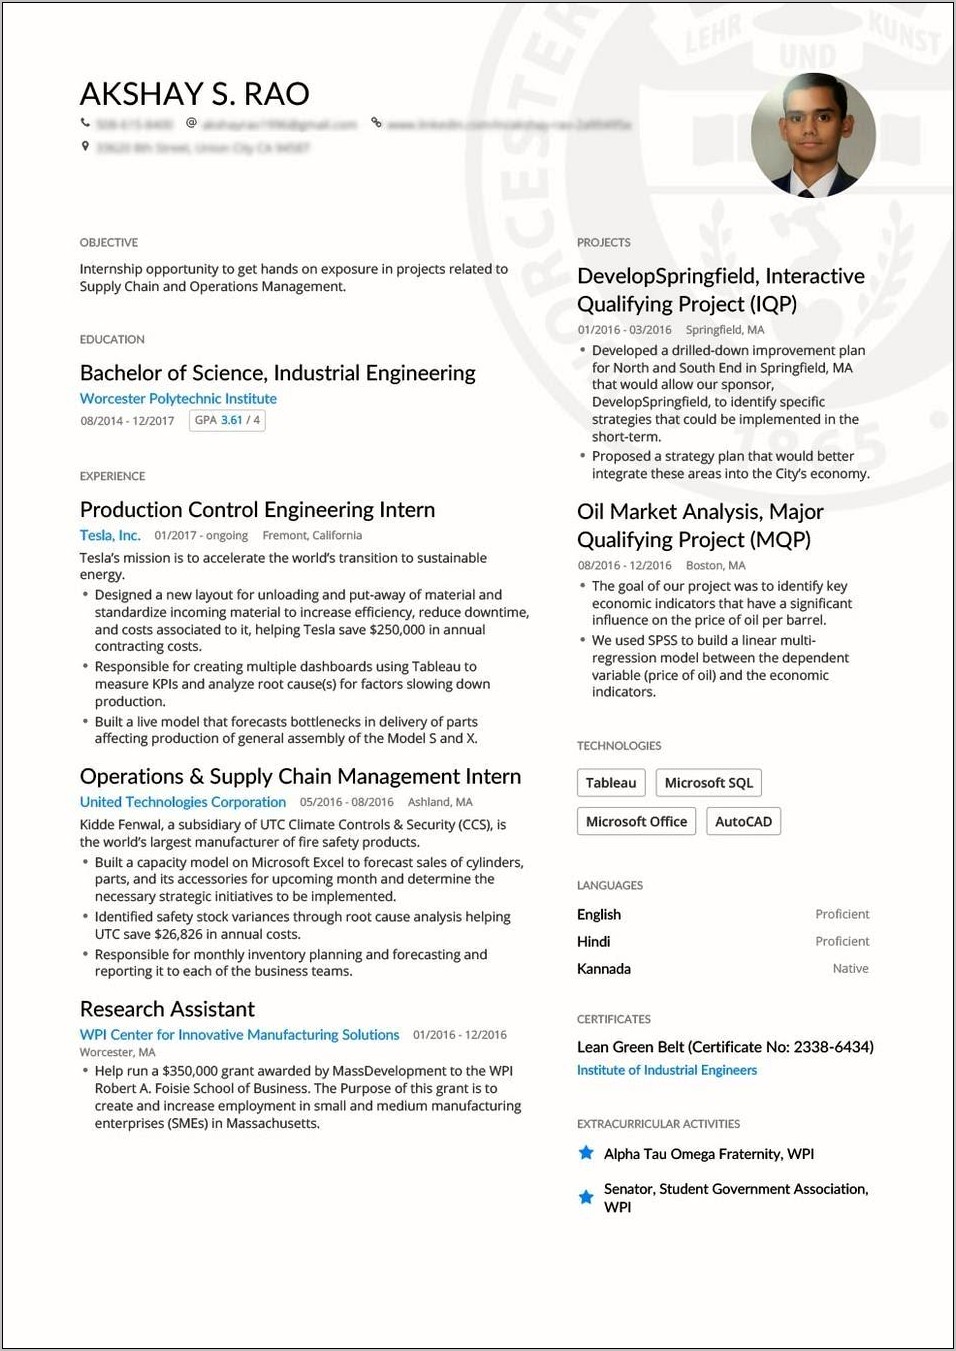 Resume Objective That Stands Out